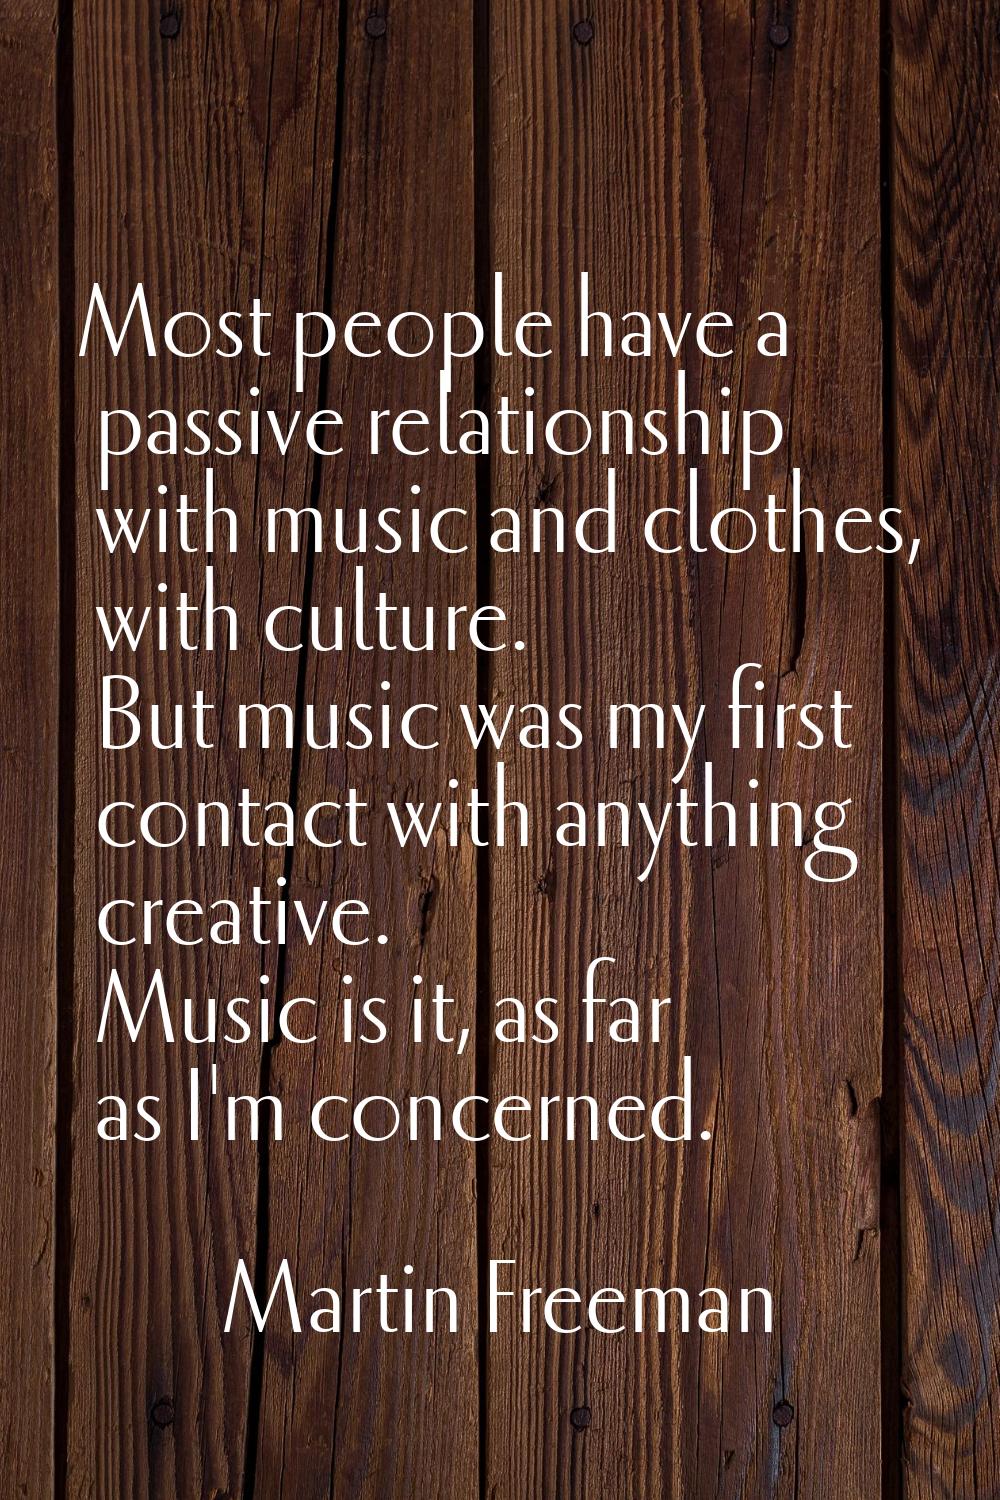 Most people have a passive relationship with music and clothes, with culture. But music was my firs